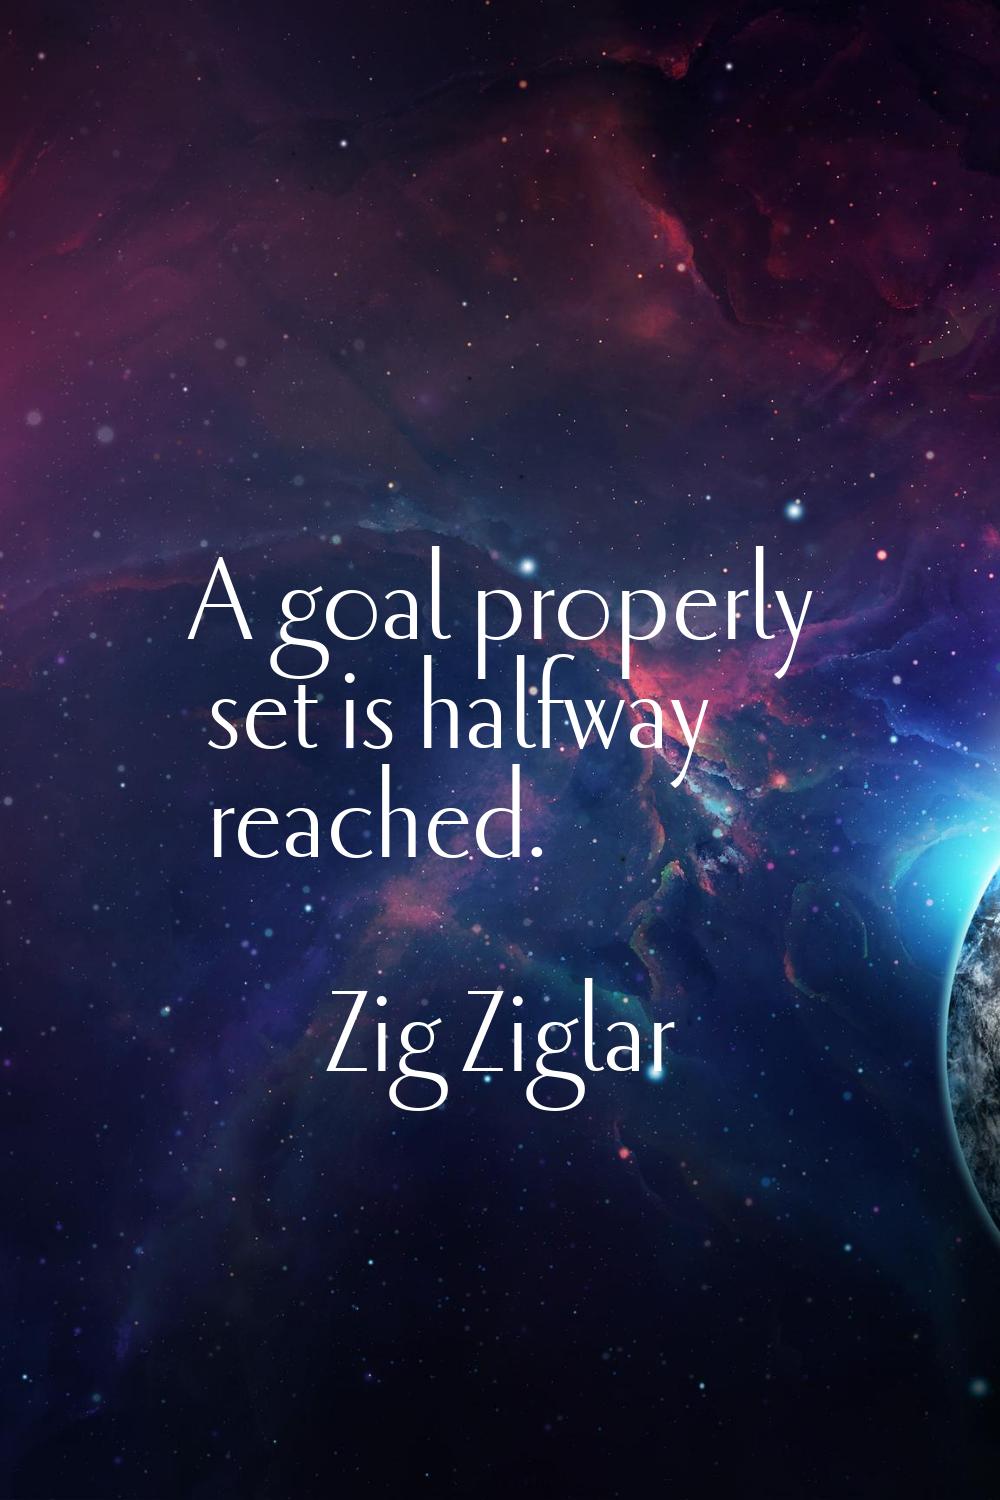 A goal properly set is halfway reached.